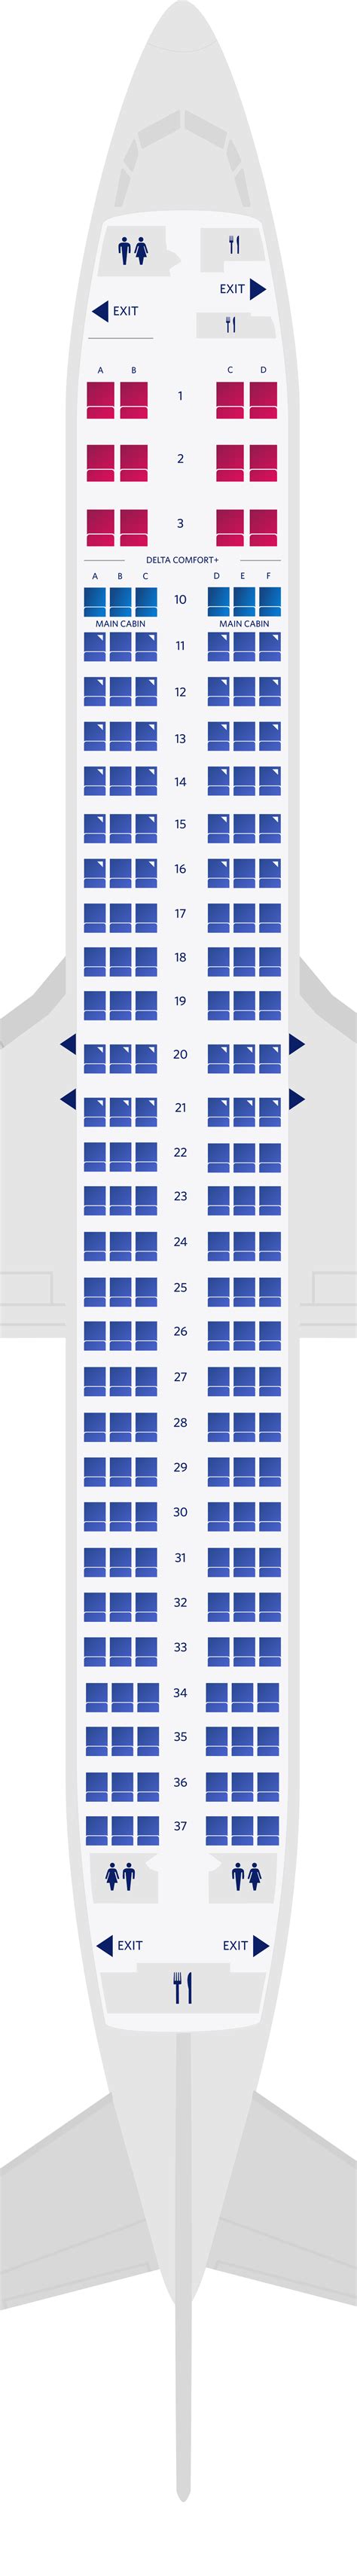 Delta 787-9 seat map. The seat layout from left to right for rows 1 and 8 is A, aisle, H. These seats come with a table on the right. The seat layout from left to right for rows 2, 4, 6, 9, 11, and 13 is C, aisle, E, G, aisle, K. These seats come with a table on the left. The seat layout from left to right for rows 3, 5, 7, 10, and 12 is A, aisle, D, F, aisle, H. 